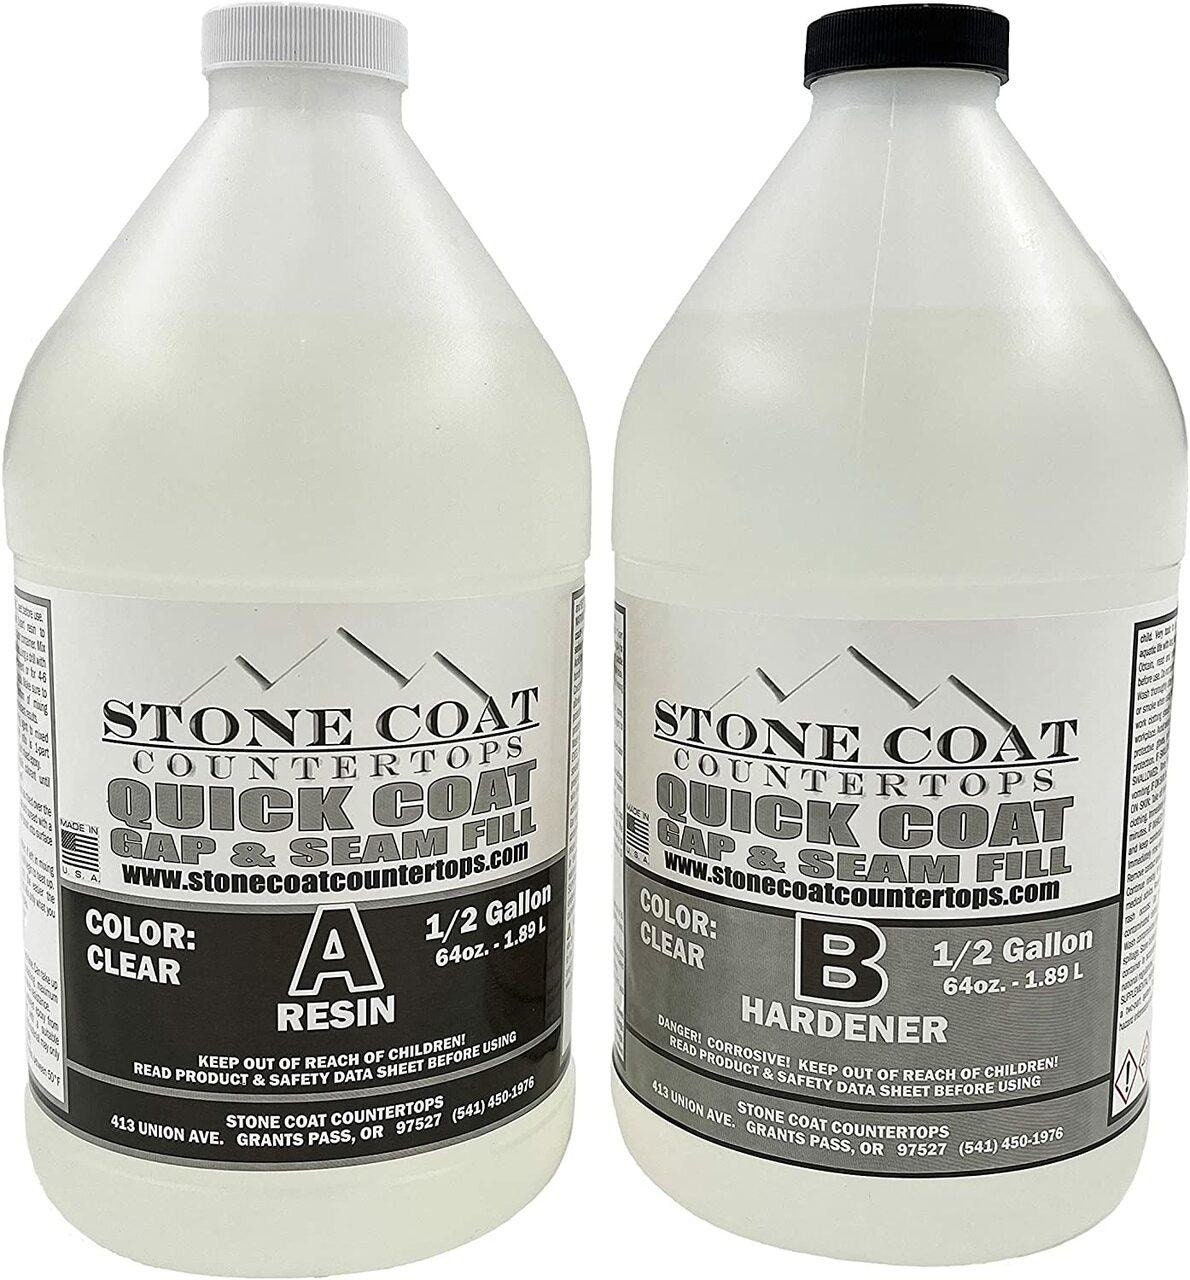 stonecoatcountertops on X: Stone Coat Countertop Epoxy is eco safe, VOC  free with very little order. Don't throw away your old countertops call  today! 541-450-1976 #stonecoatcountertops #DIY #resin   / X